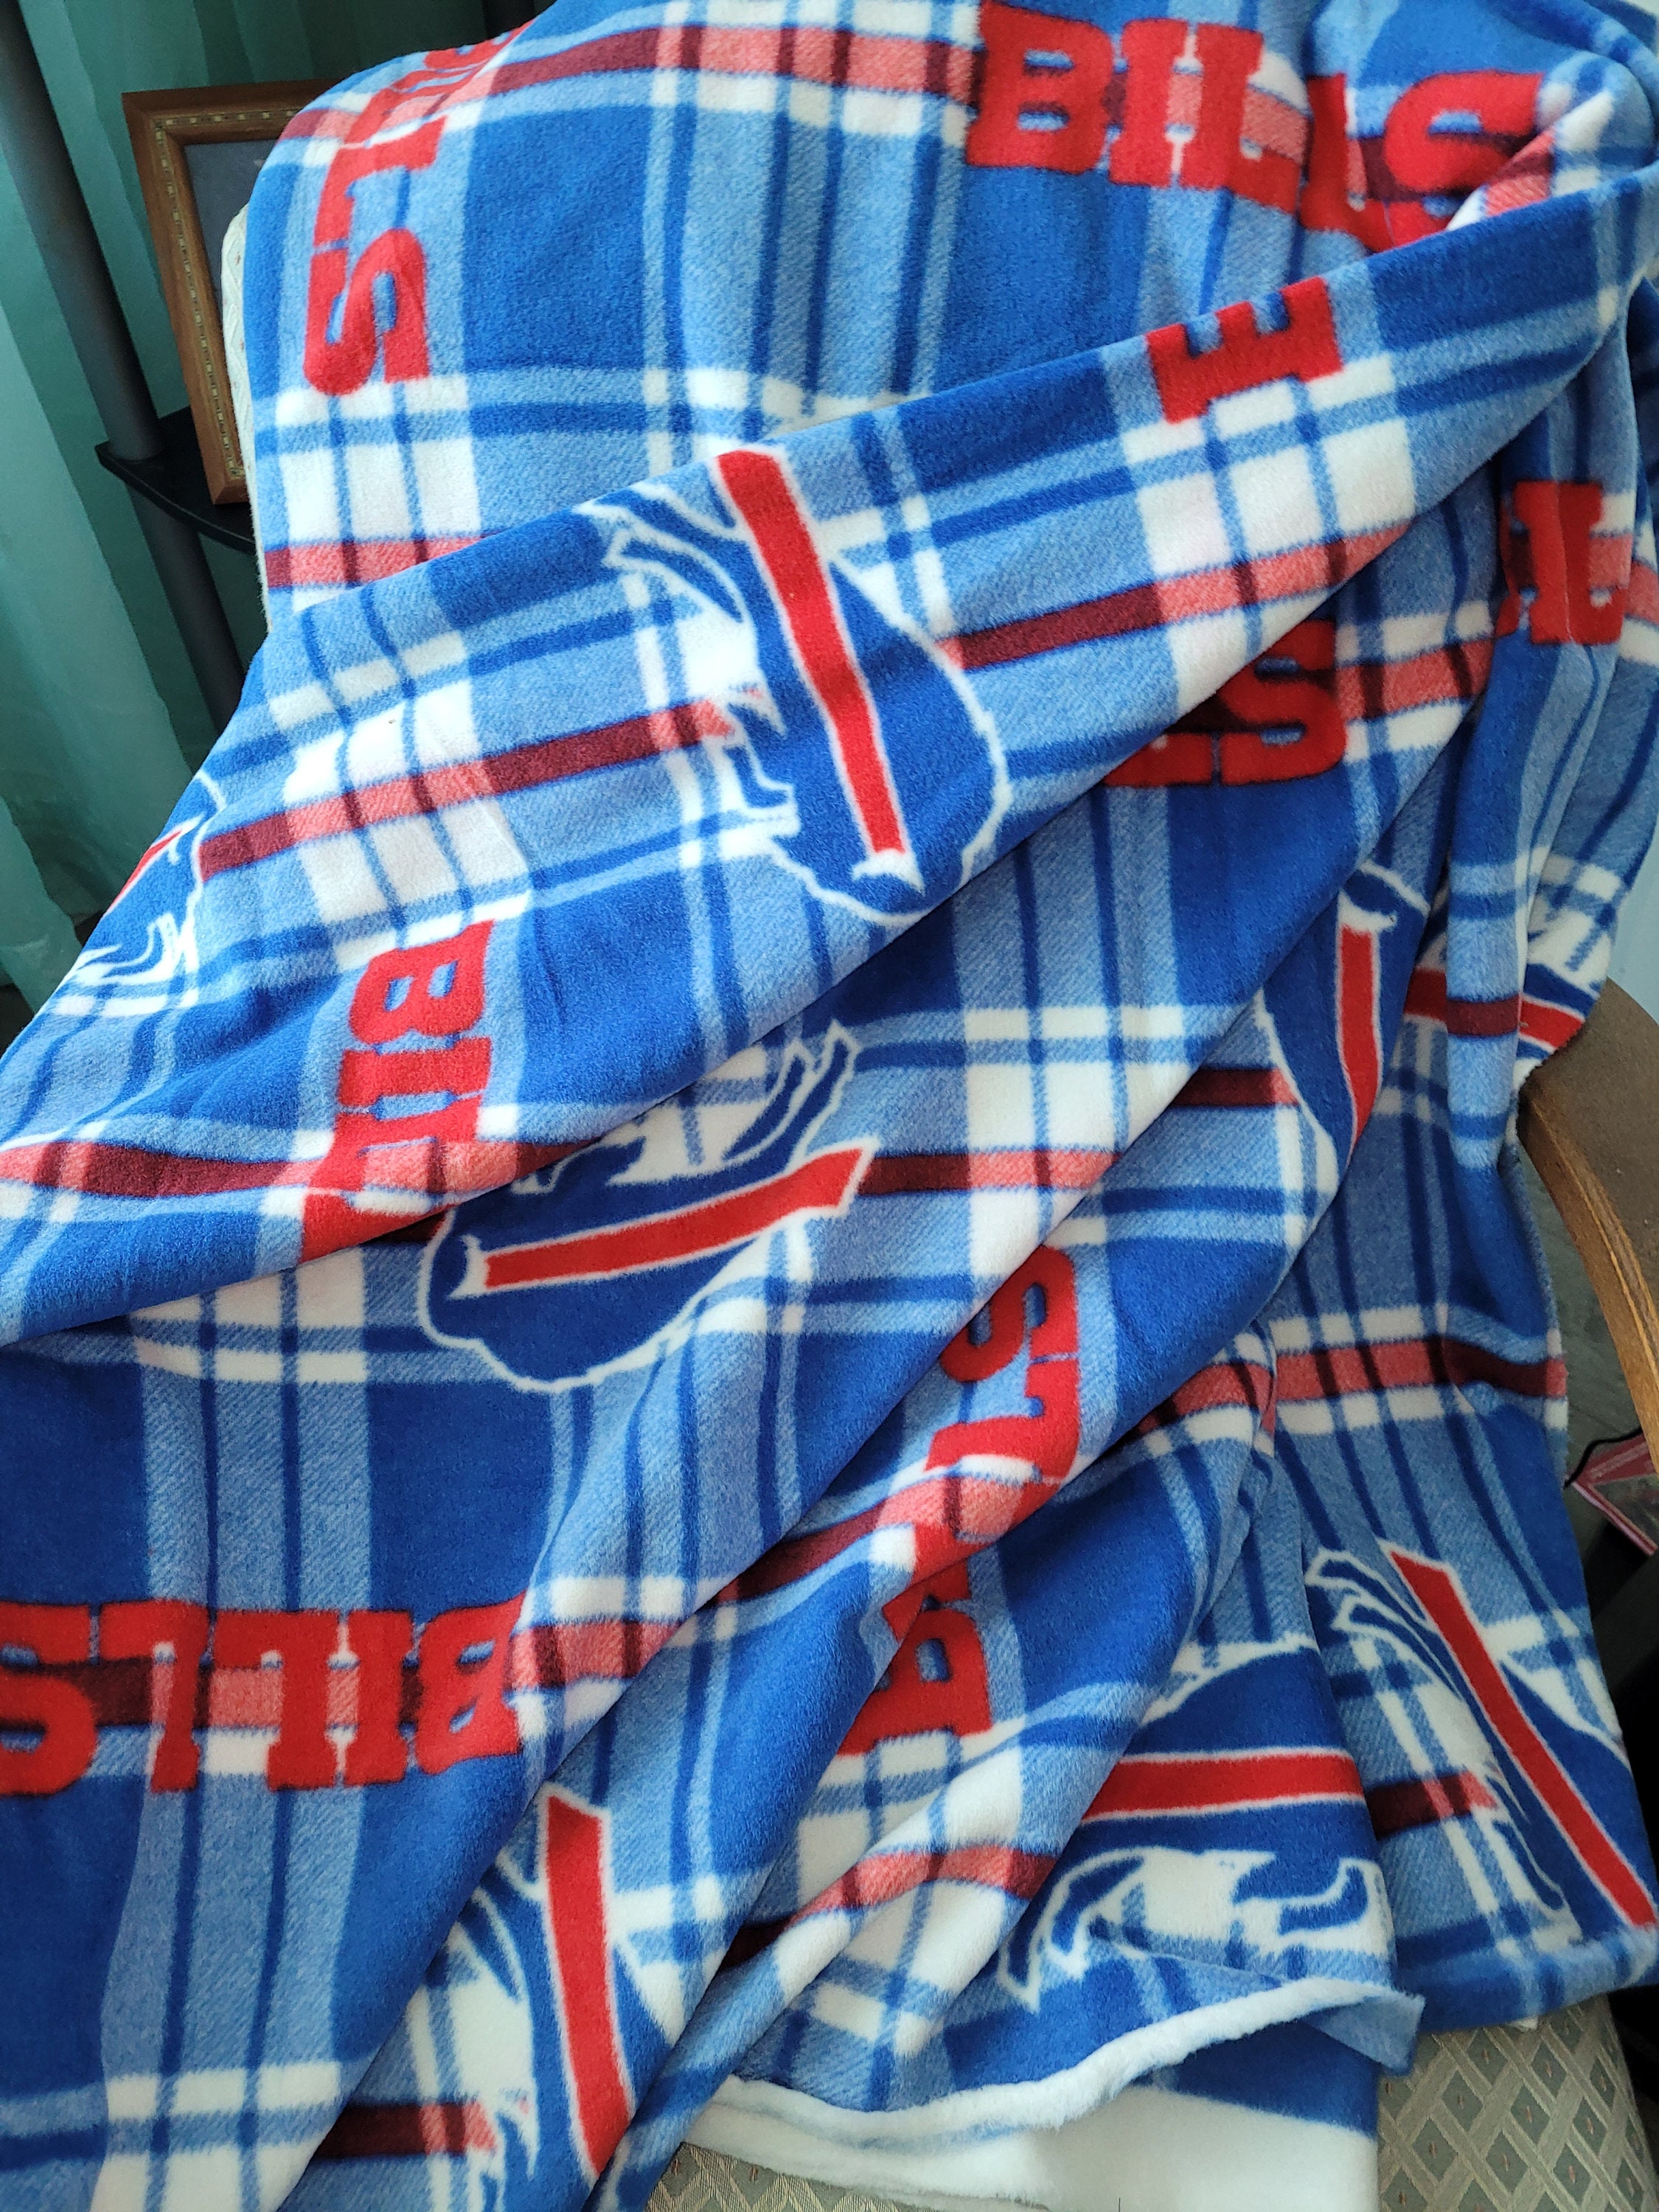 Buffalo Bills Fleece Fabric 60 Wide Sold by the Yard Make Your Own No  Sewing Blankets Scarves, Pillows, 